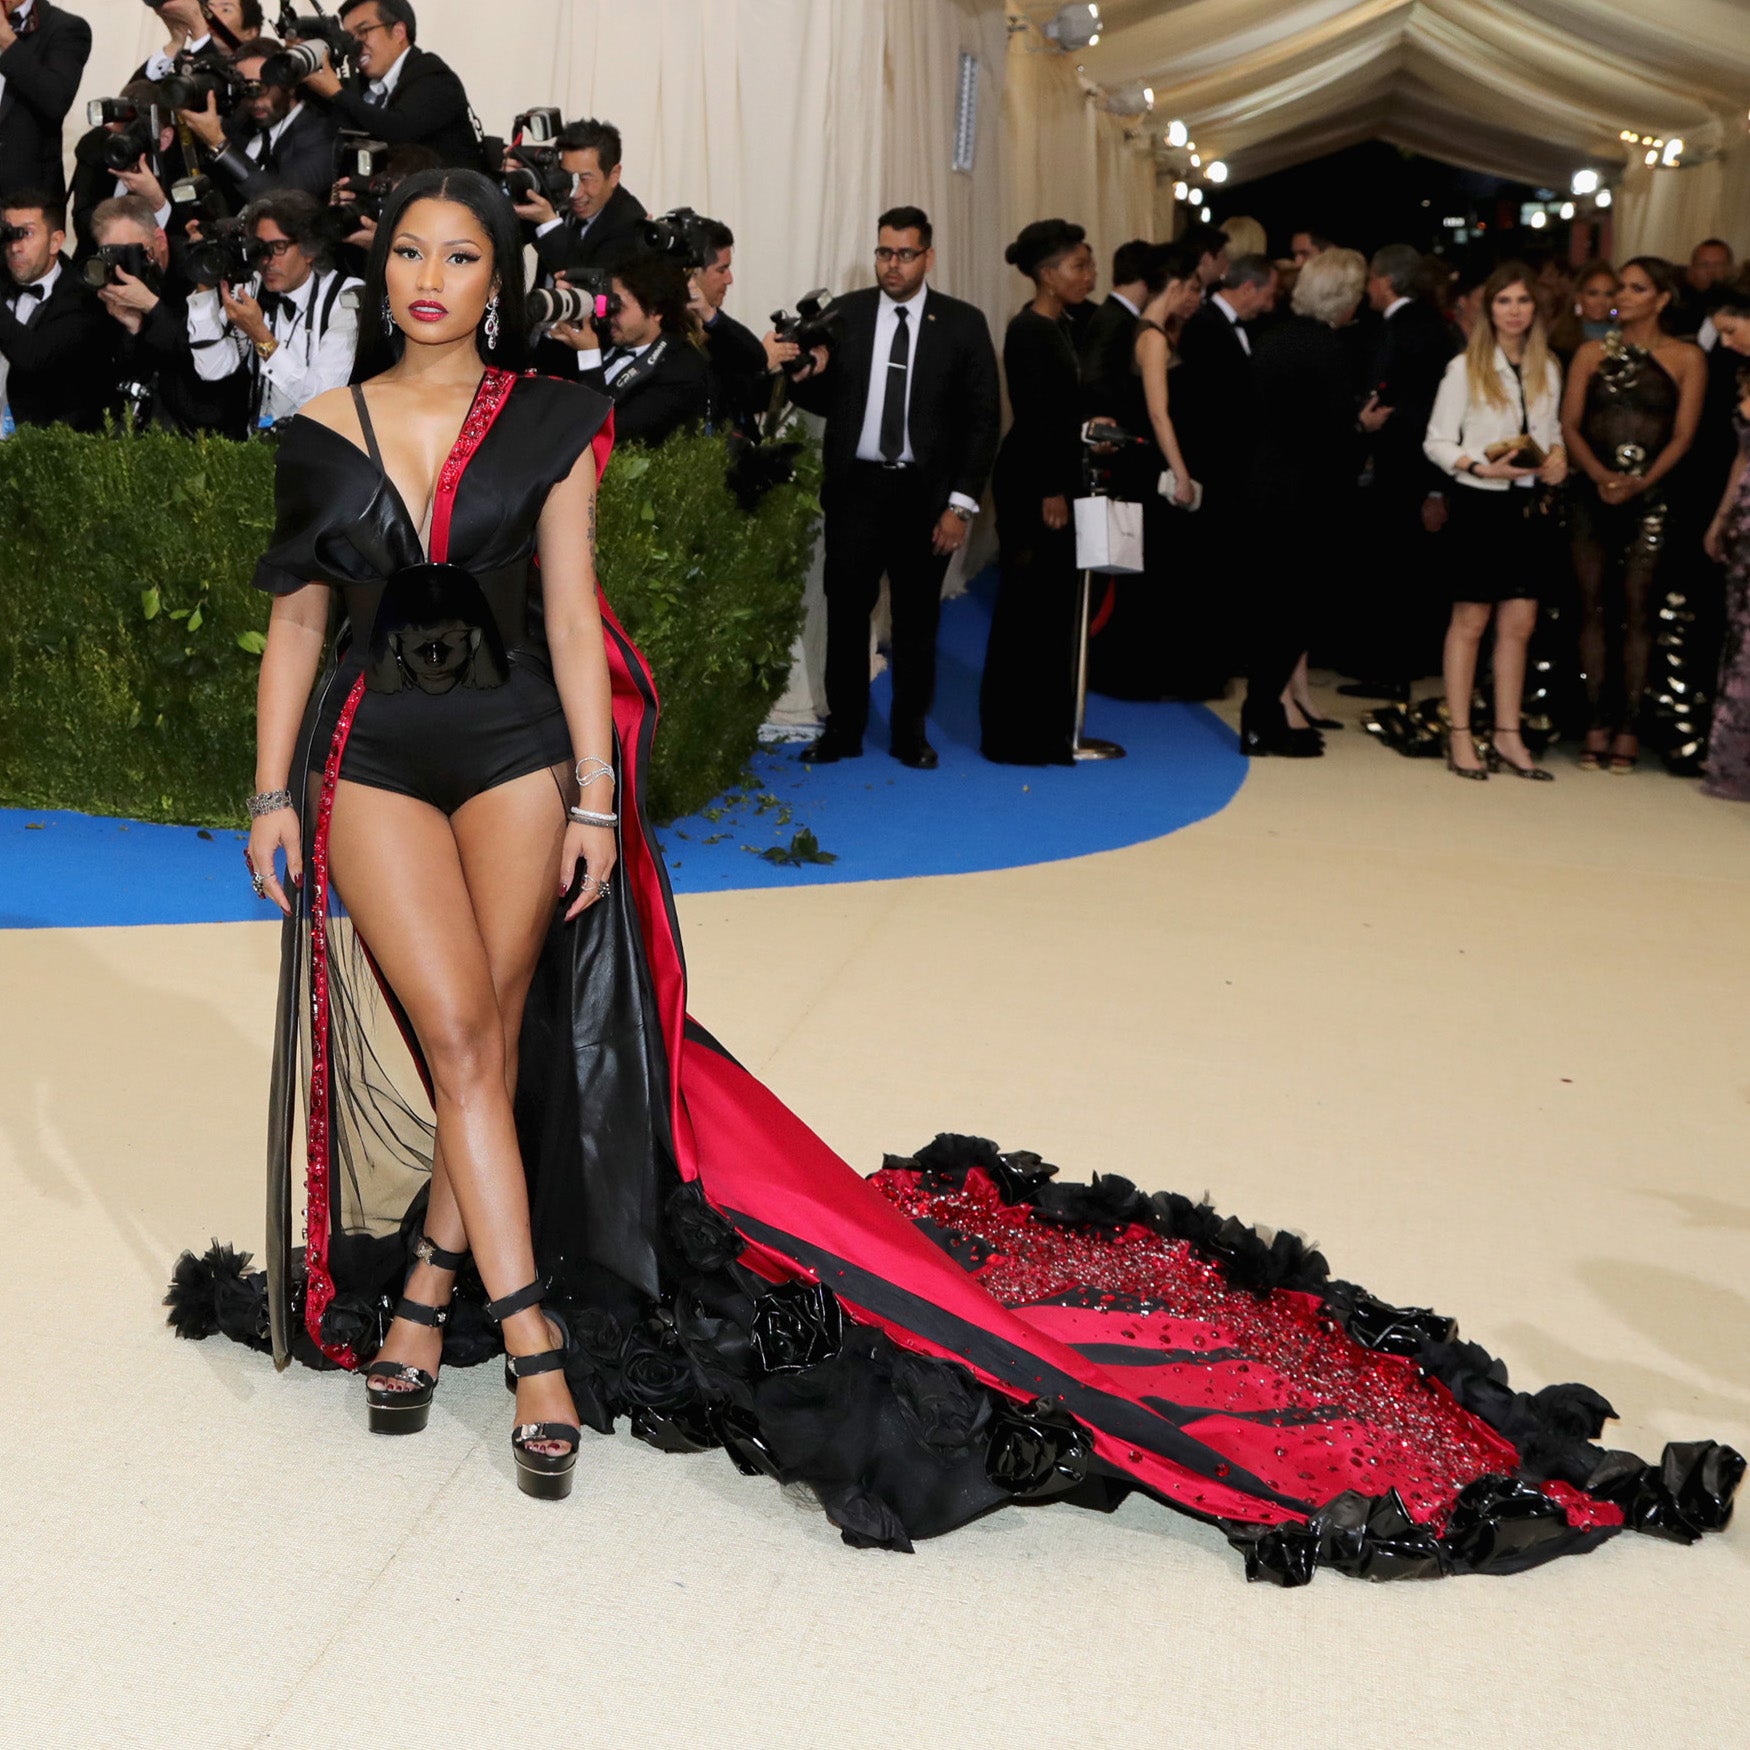 The Jaw-Dropping Fashion Moments That Stole the 2017 MET Gala
